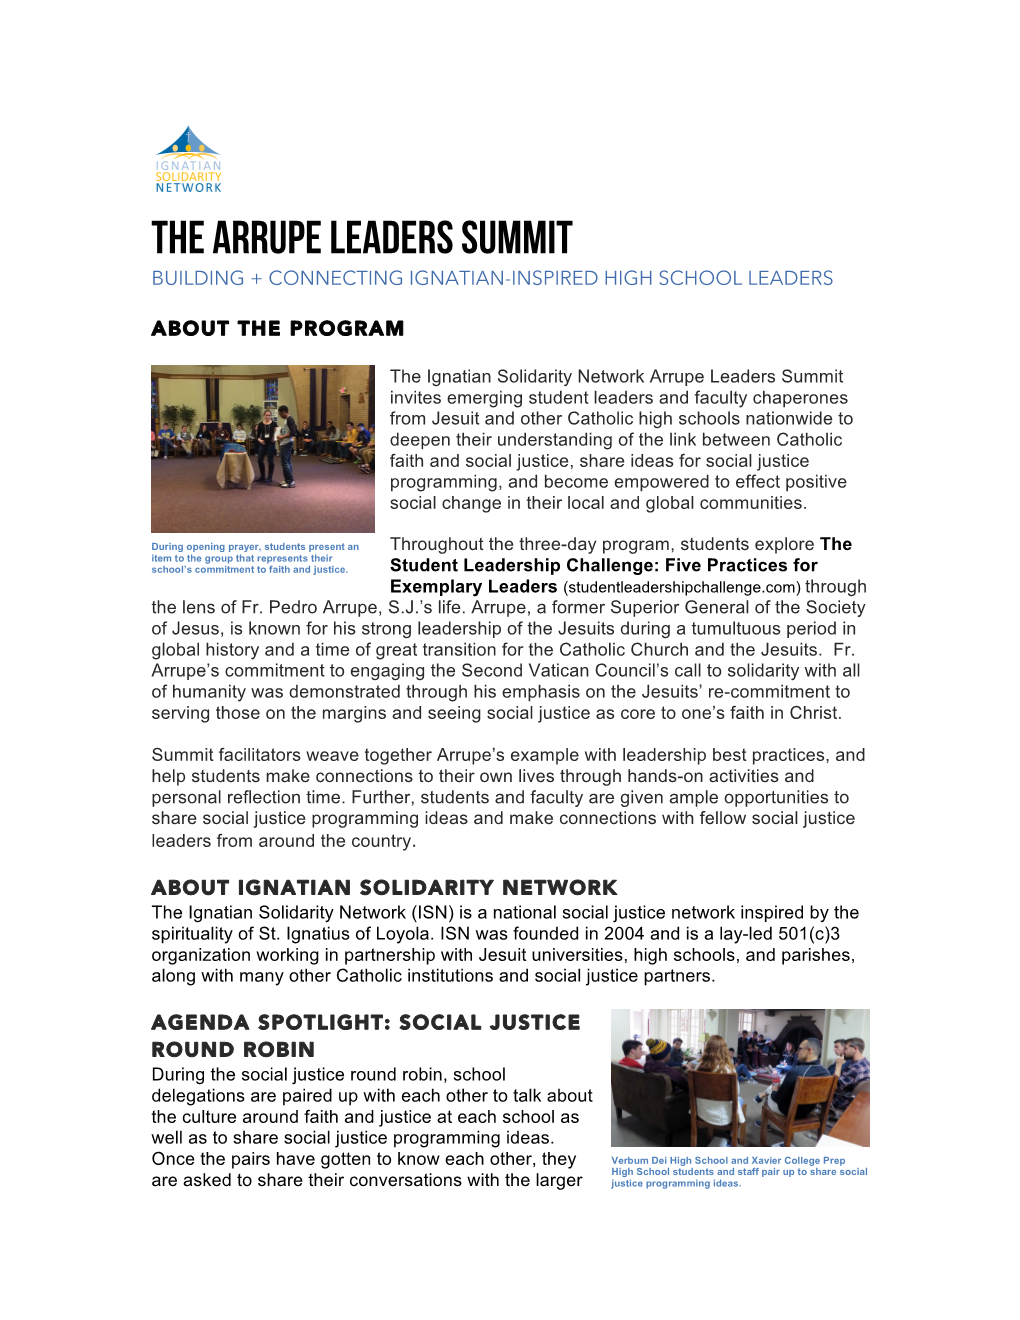 The Arrupe Leaders Summit BUILDING + CONNECTING IGNATIAN-INSPIRED HIGH SCHOOL LEADERS